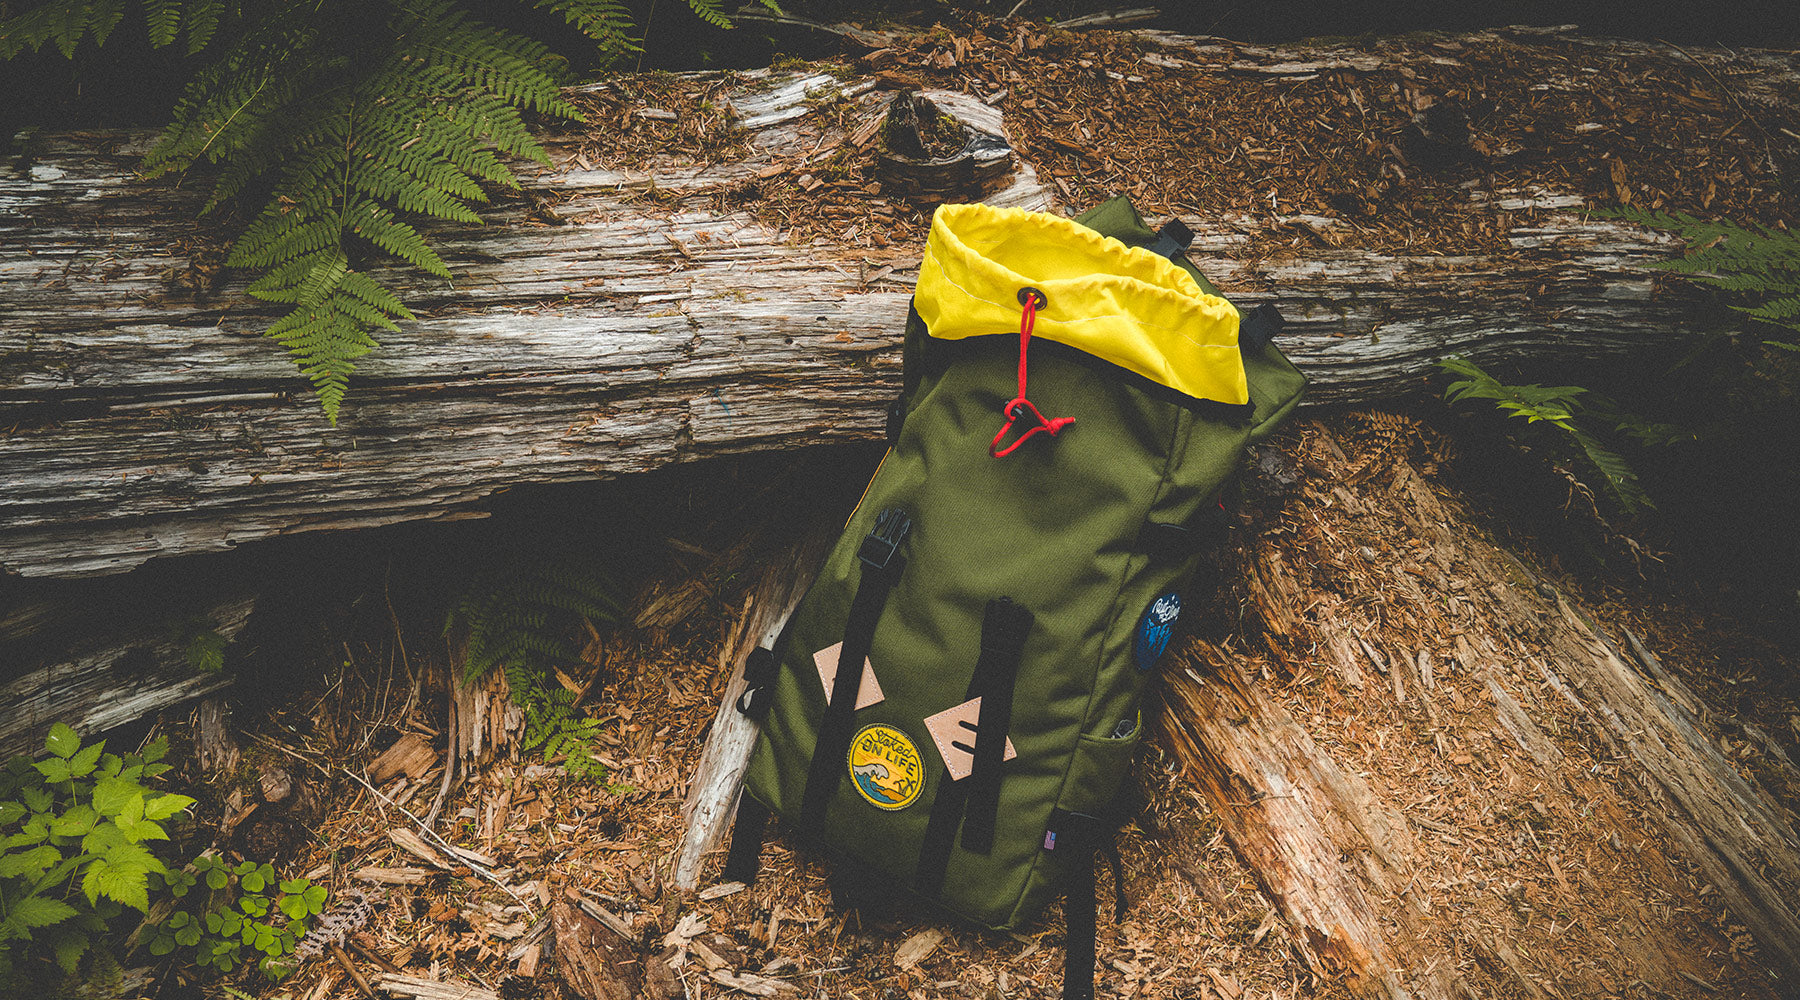 5 Patch Ideas for Your Backpack - American Patch